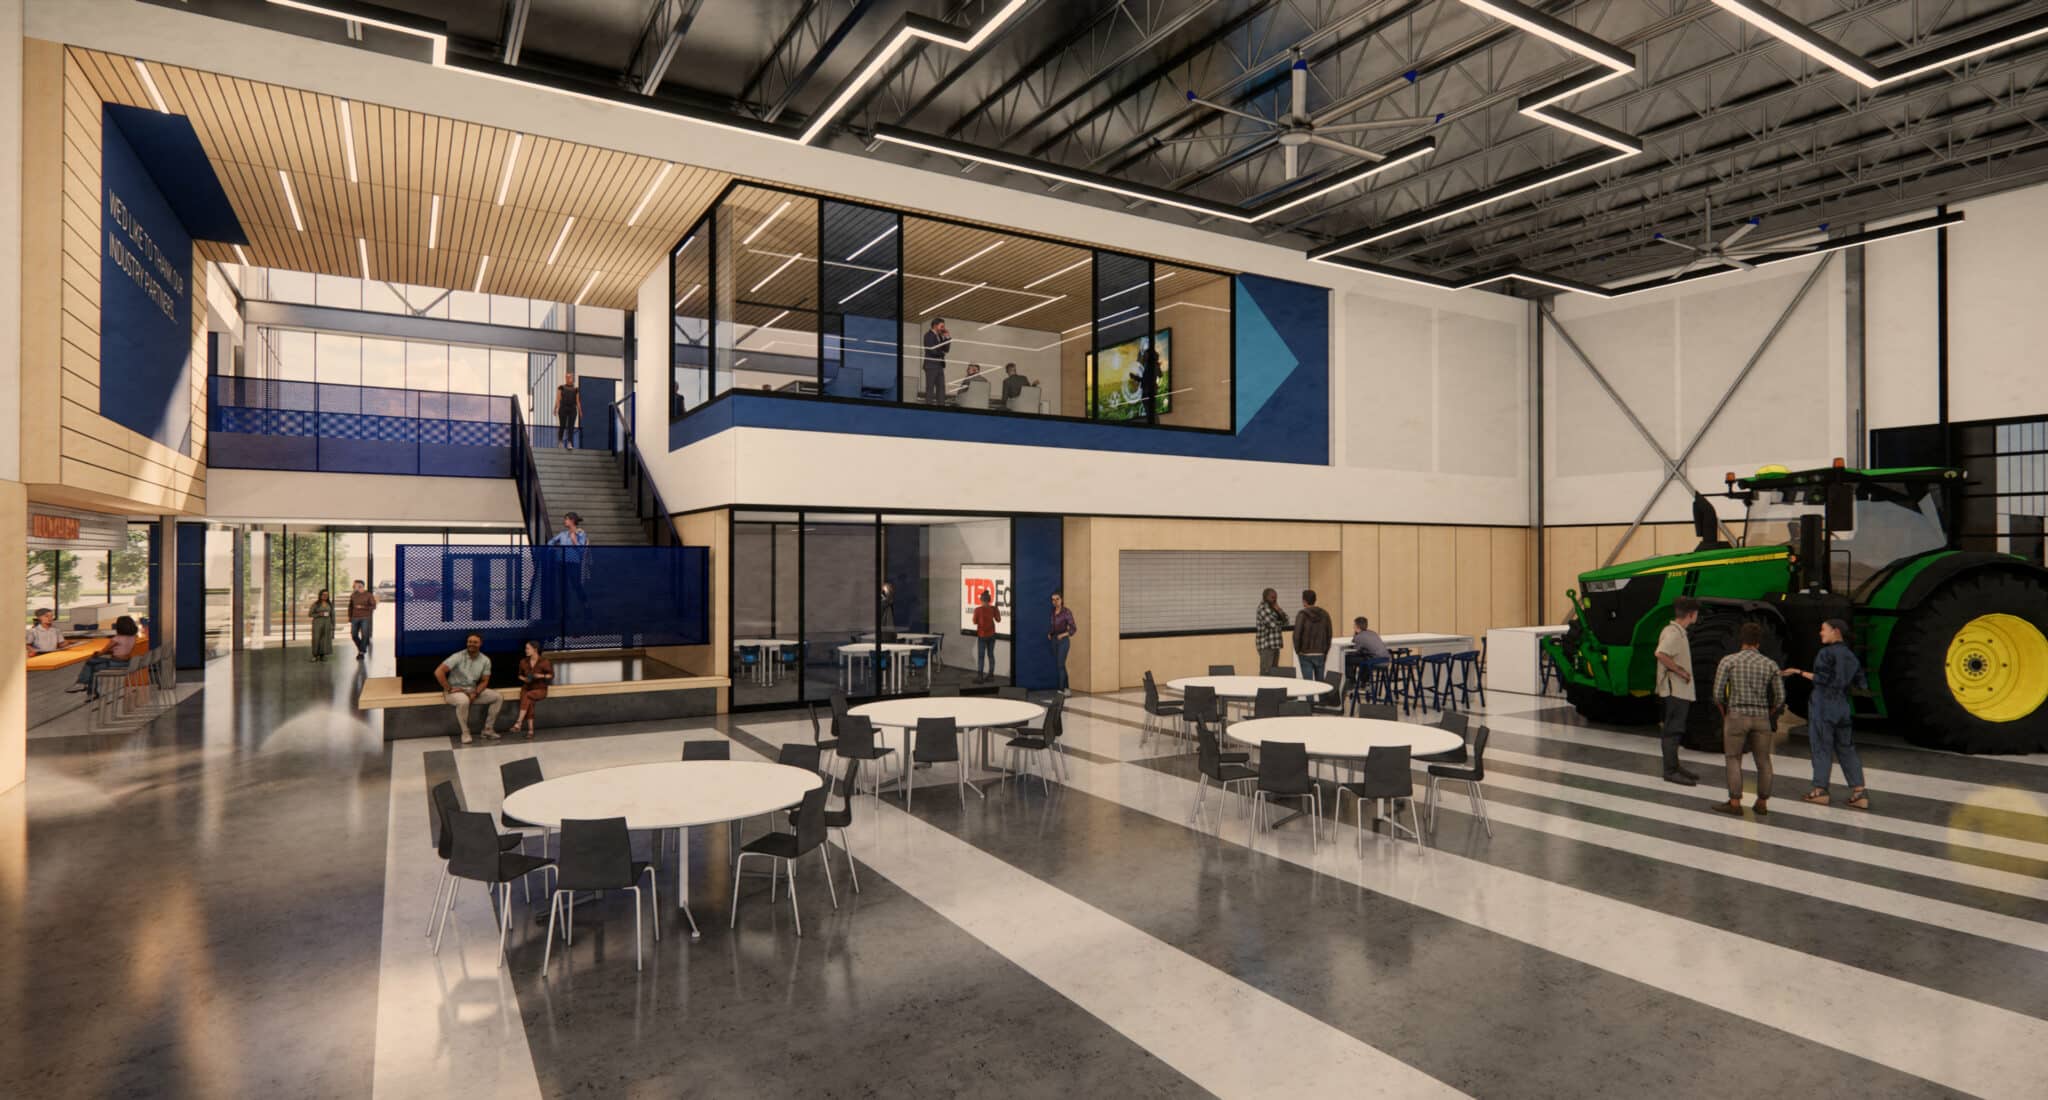 Commons Area Rendering